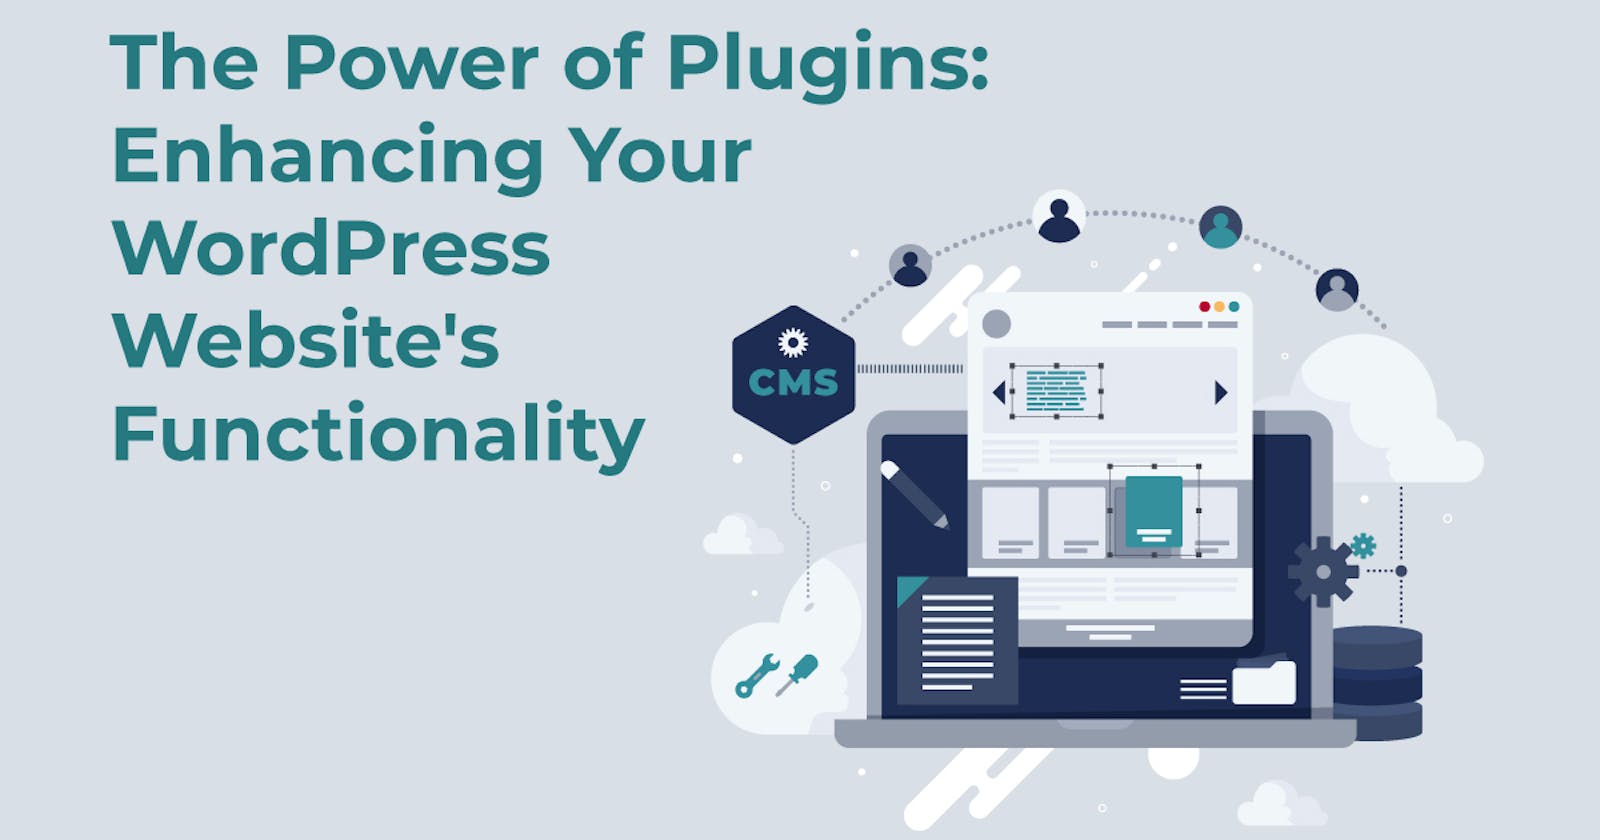 The Power of Plugins: Enhancing Your WordPress Website's Functionality